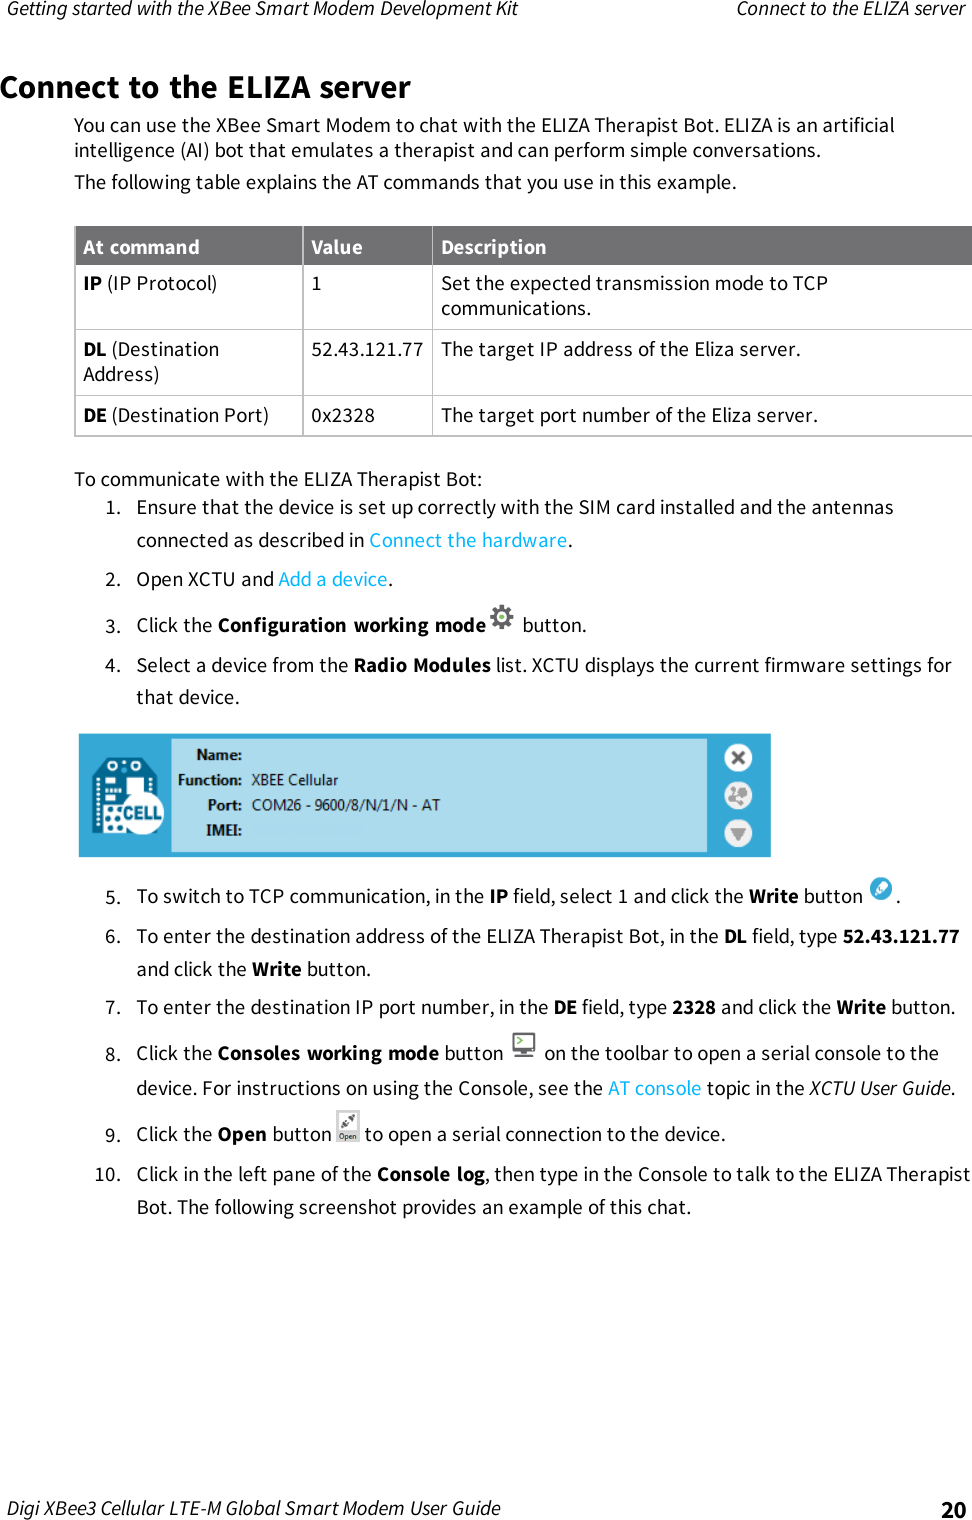 Page 20 of Digi XB3M1 XBee3 Cellular LTE-M User Manual 